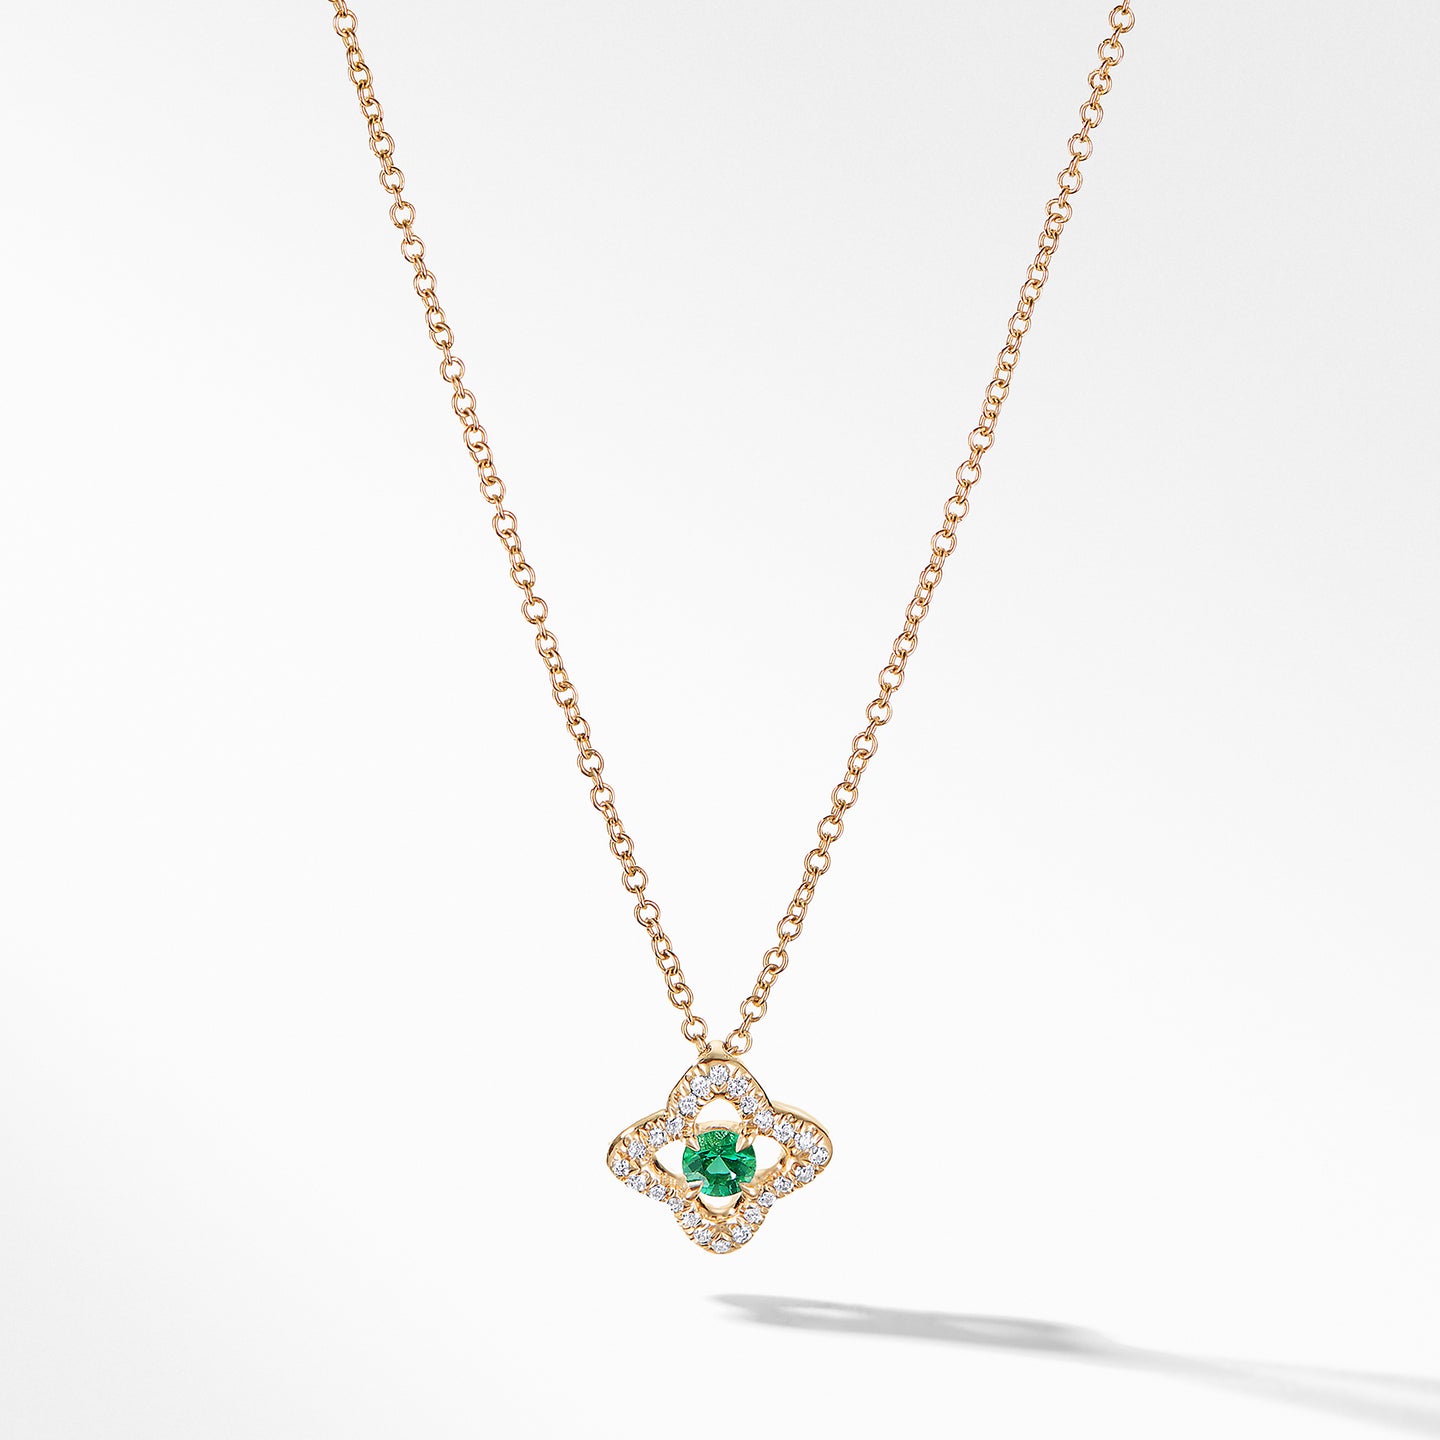 Necklace with Emerald and Diamonds in 18K Gold, 18